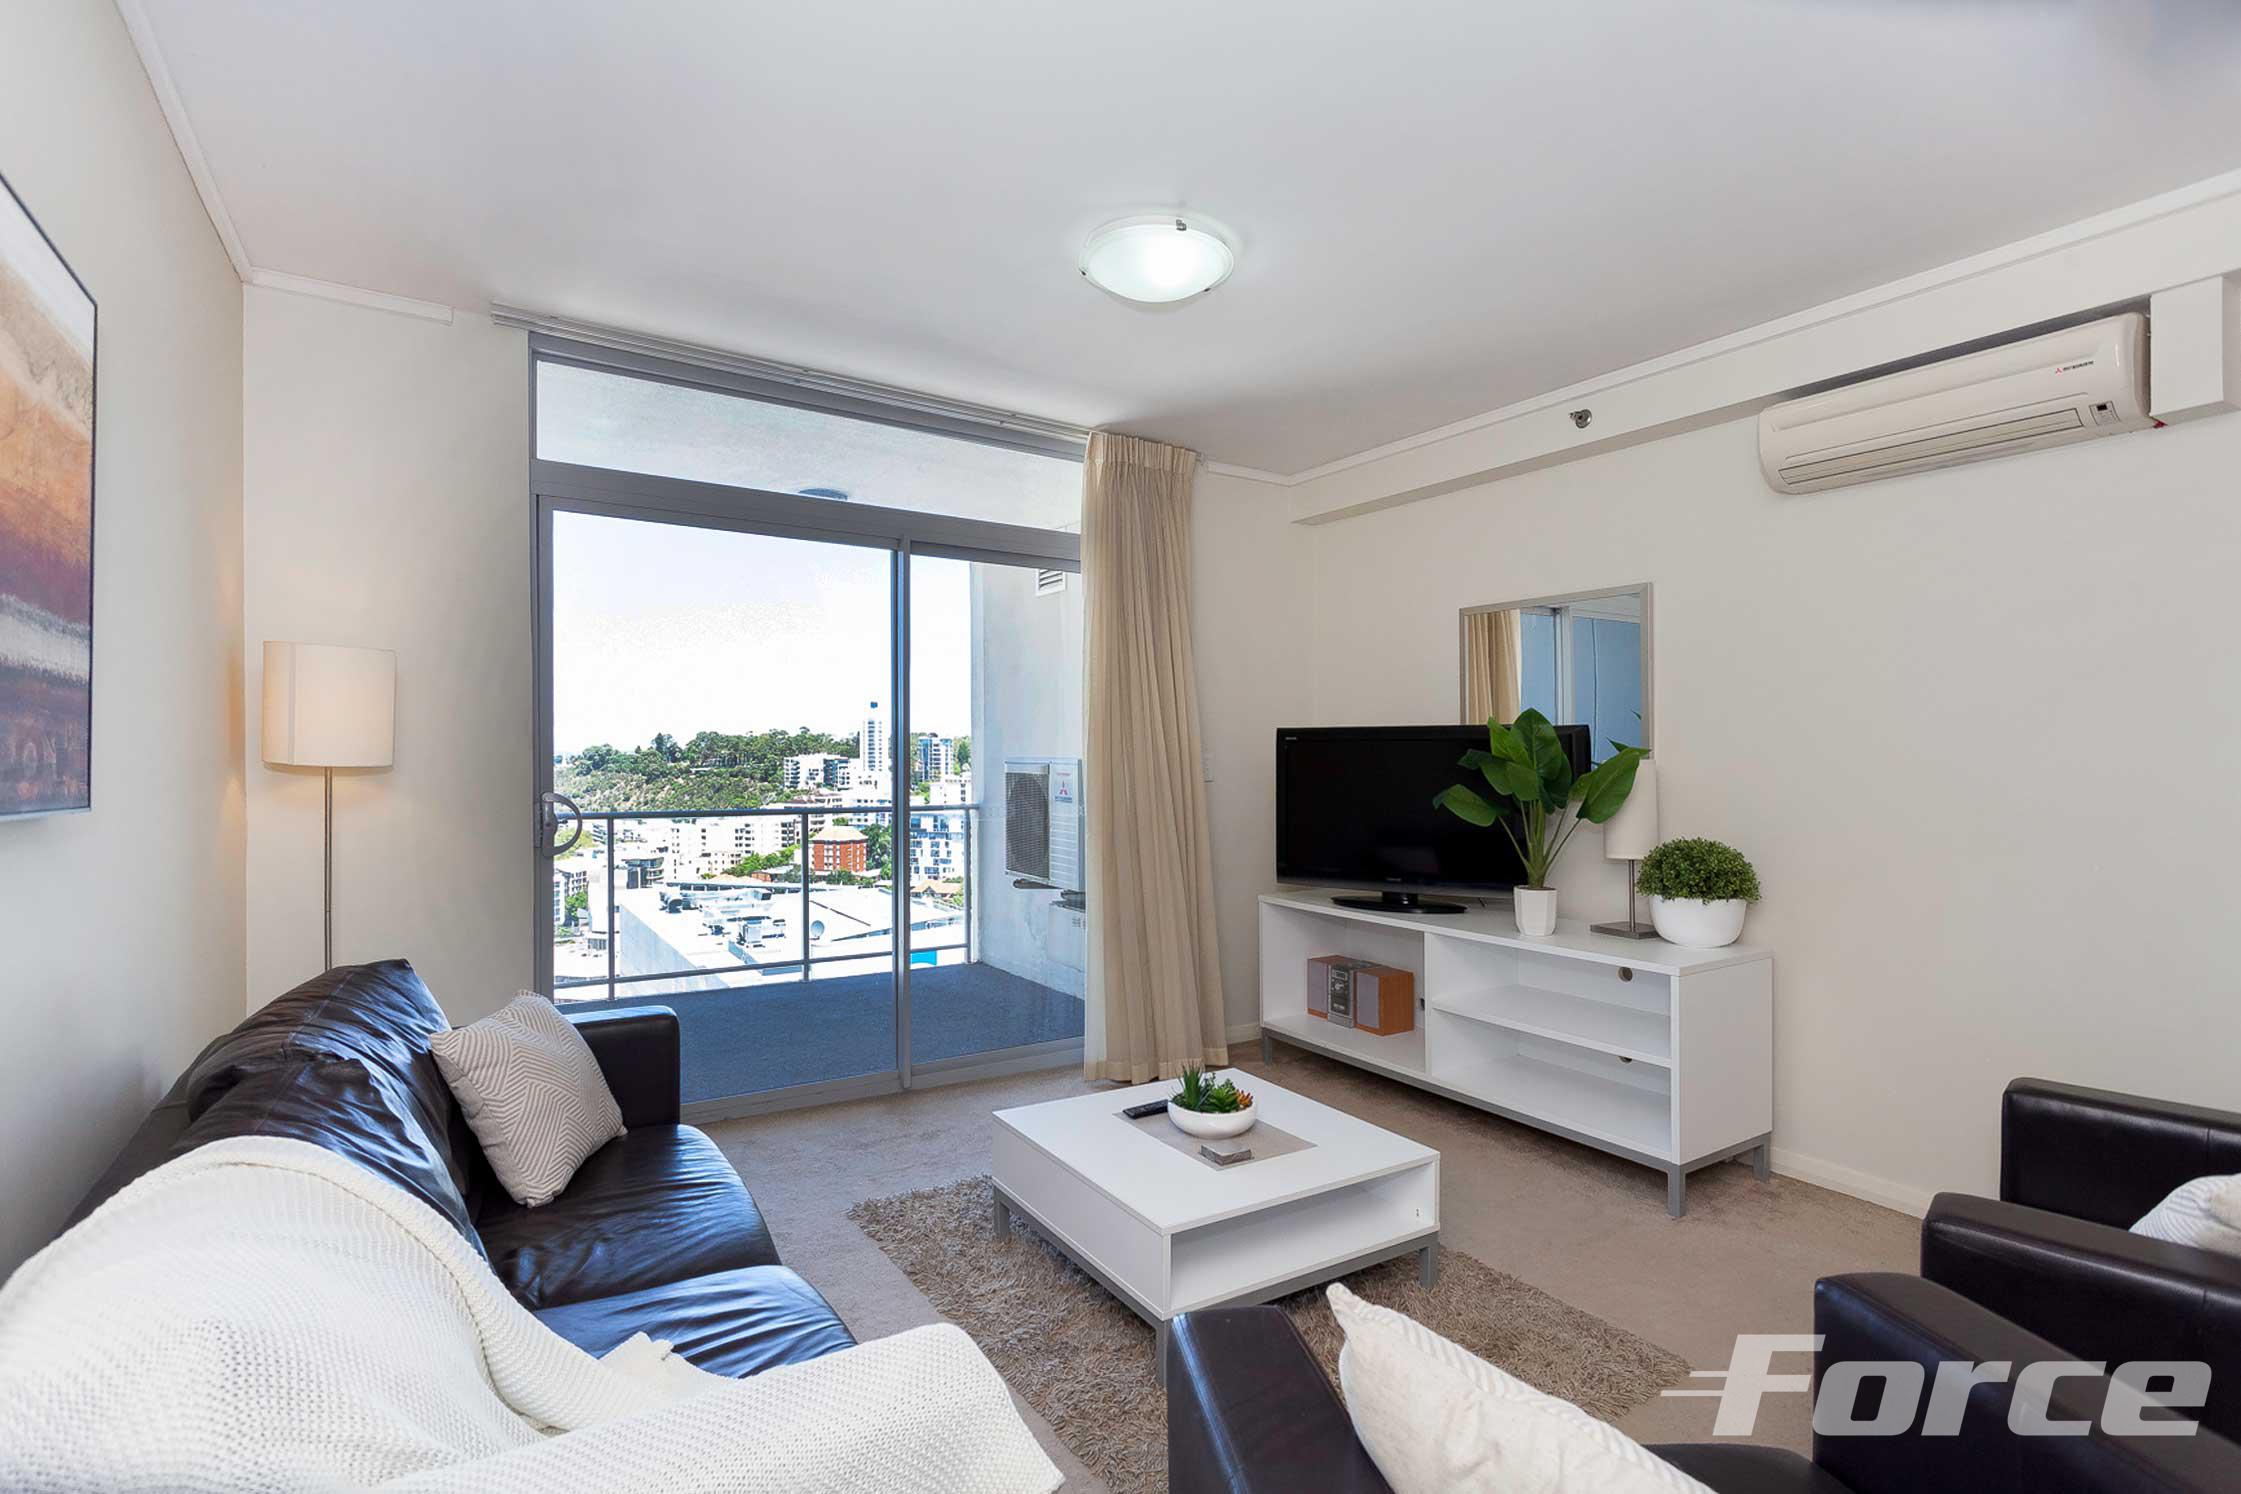 Leased Apartment 135/996 Hay Street, Perth WA 6000 - Dec 22, 2022 - Homely